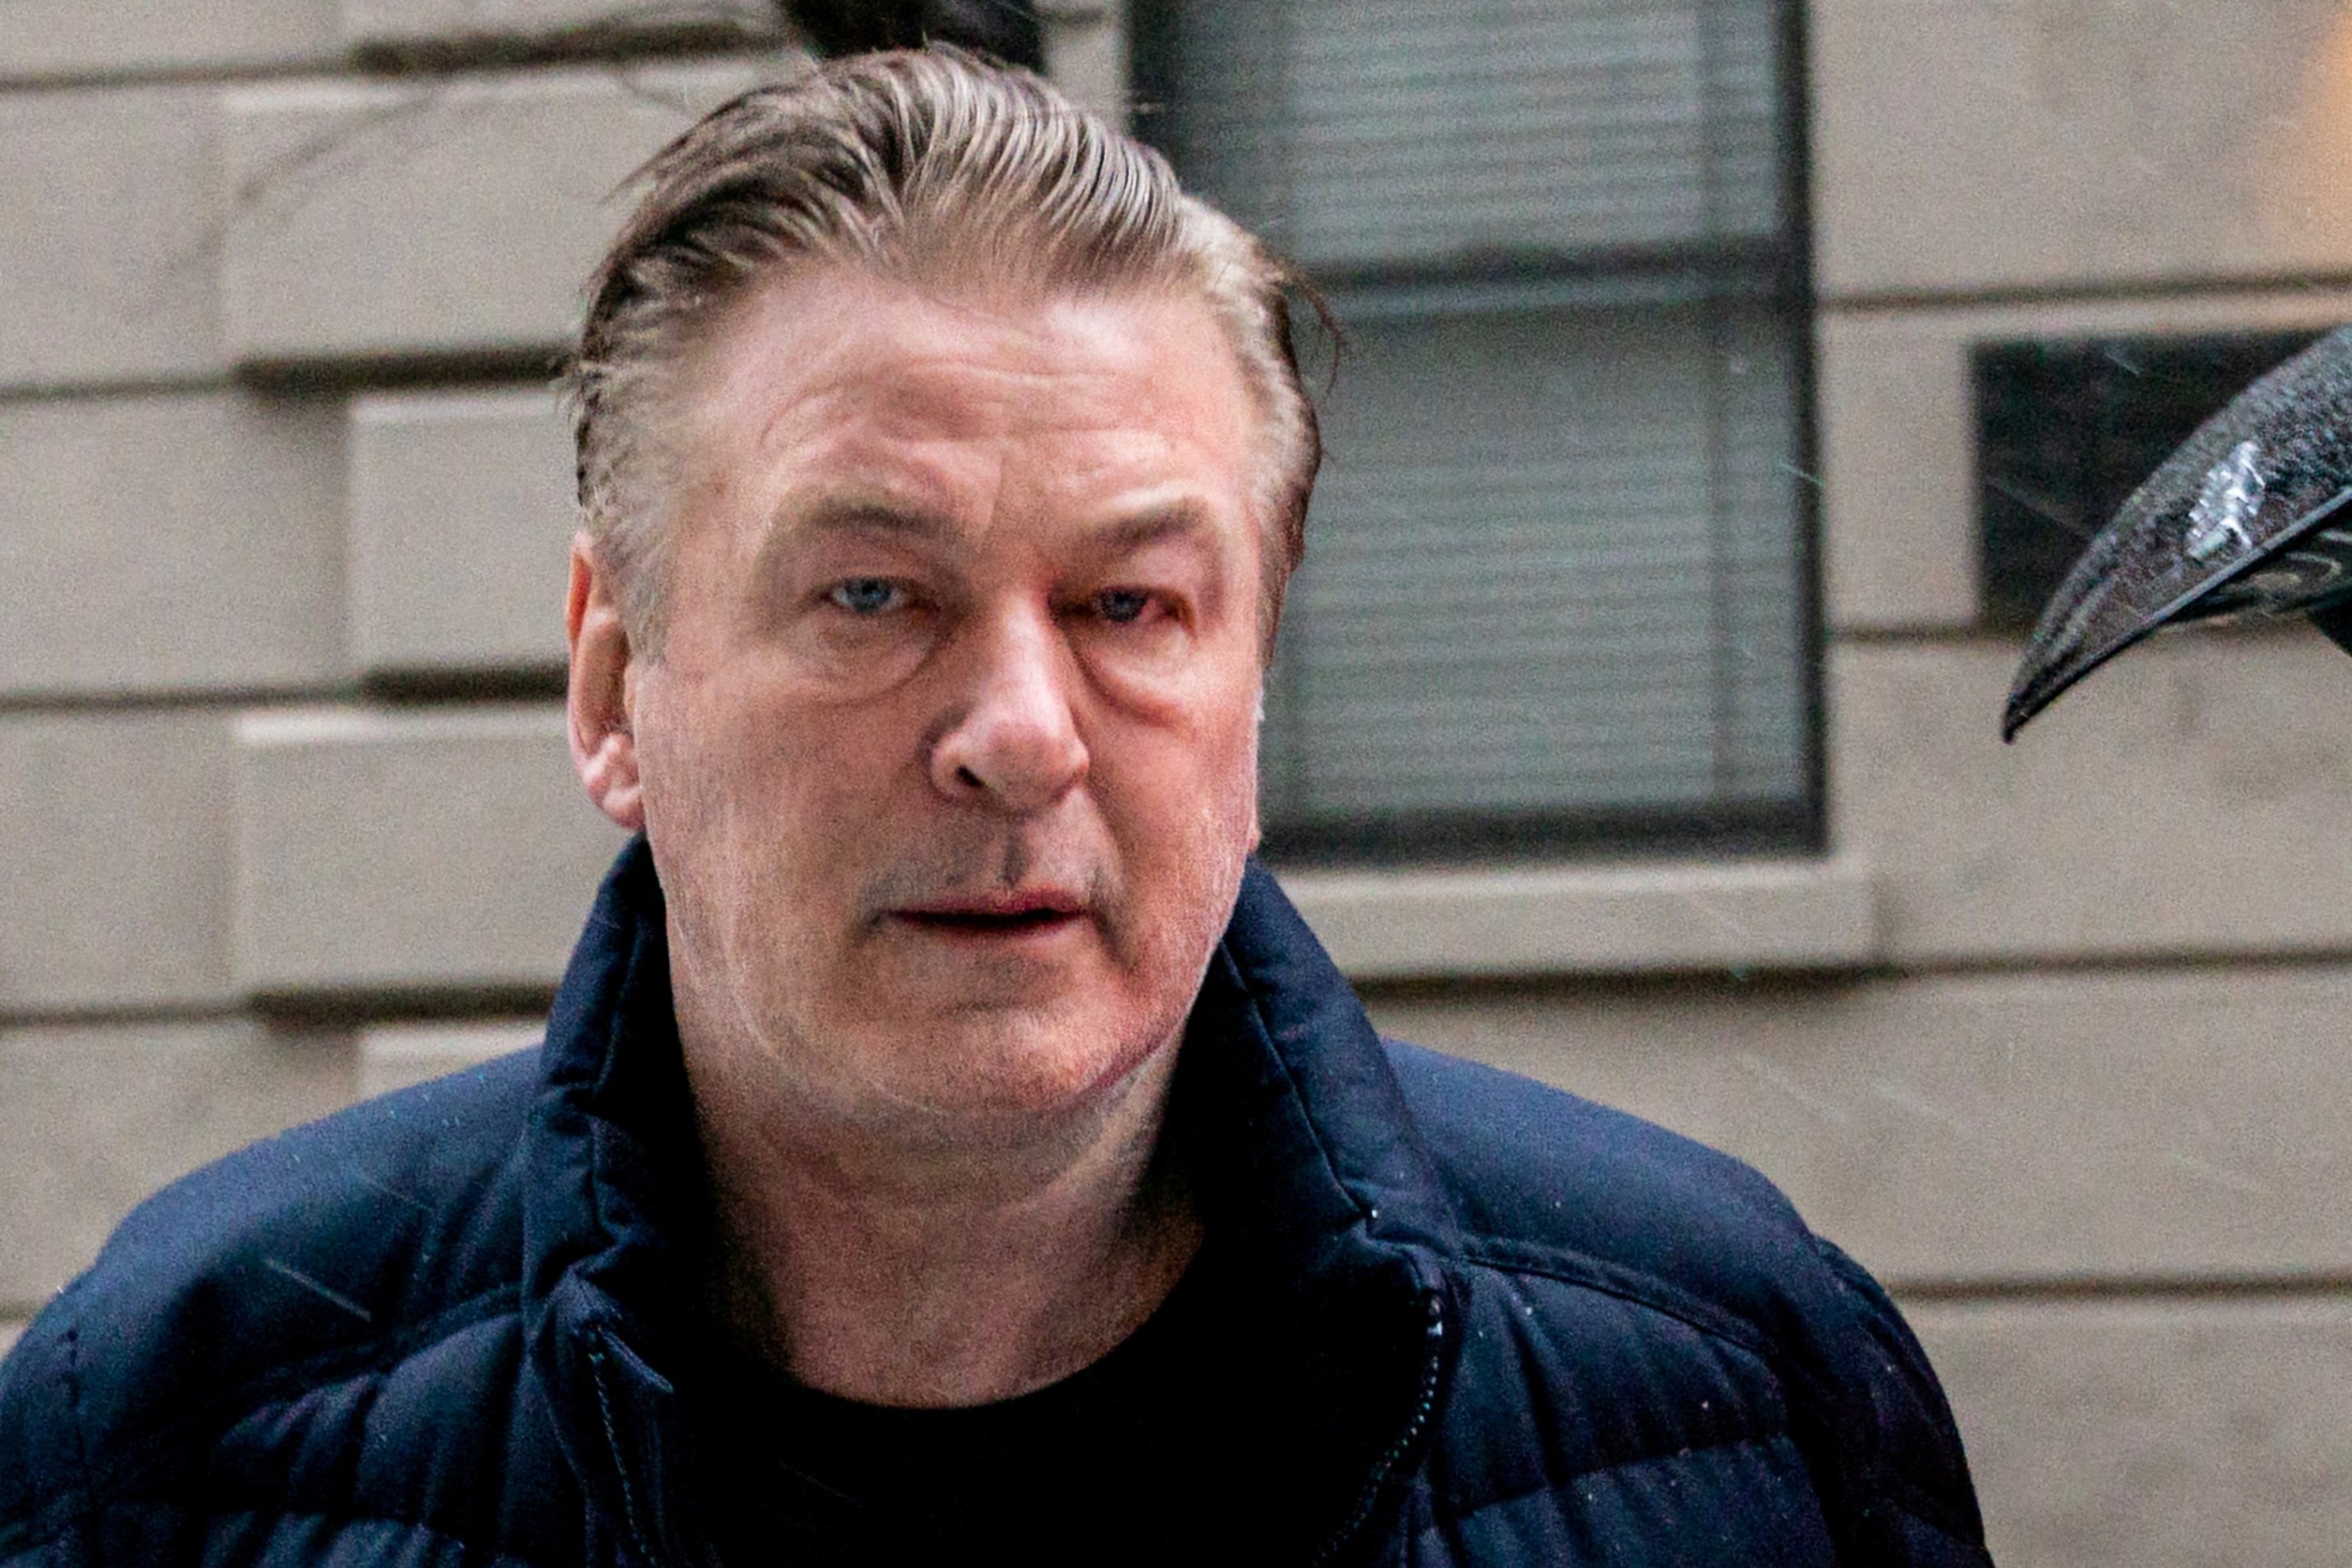 PHOTO: Actor Alec Baldwin departs his home, as he will be charged with involuntary manslaughter for the fatal shooting of cinematographer Halyna Hutchins on the set of the movie "Rust",  in New York, Jan. 31, 2023.